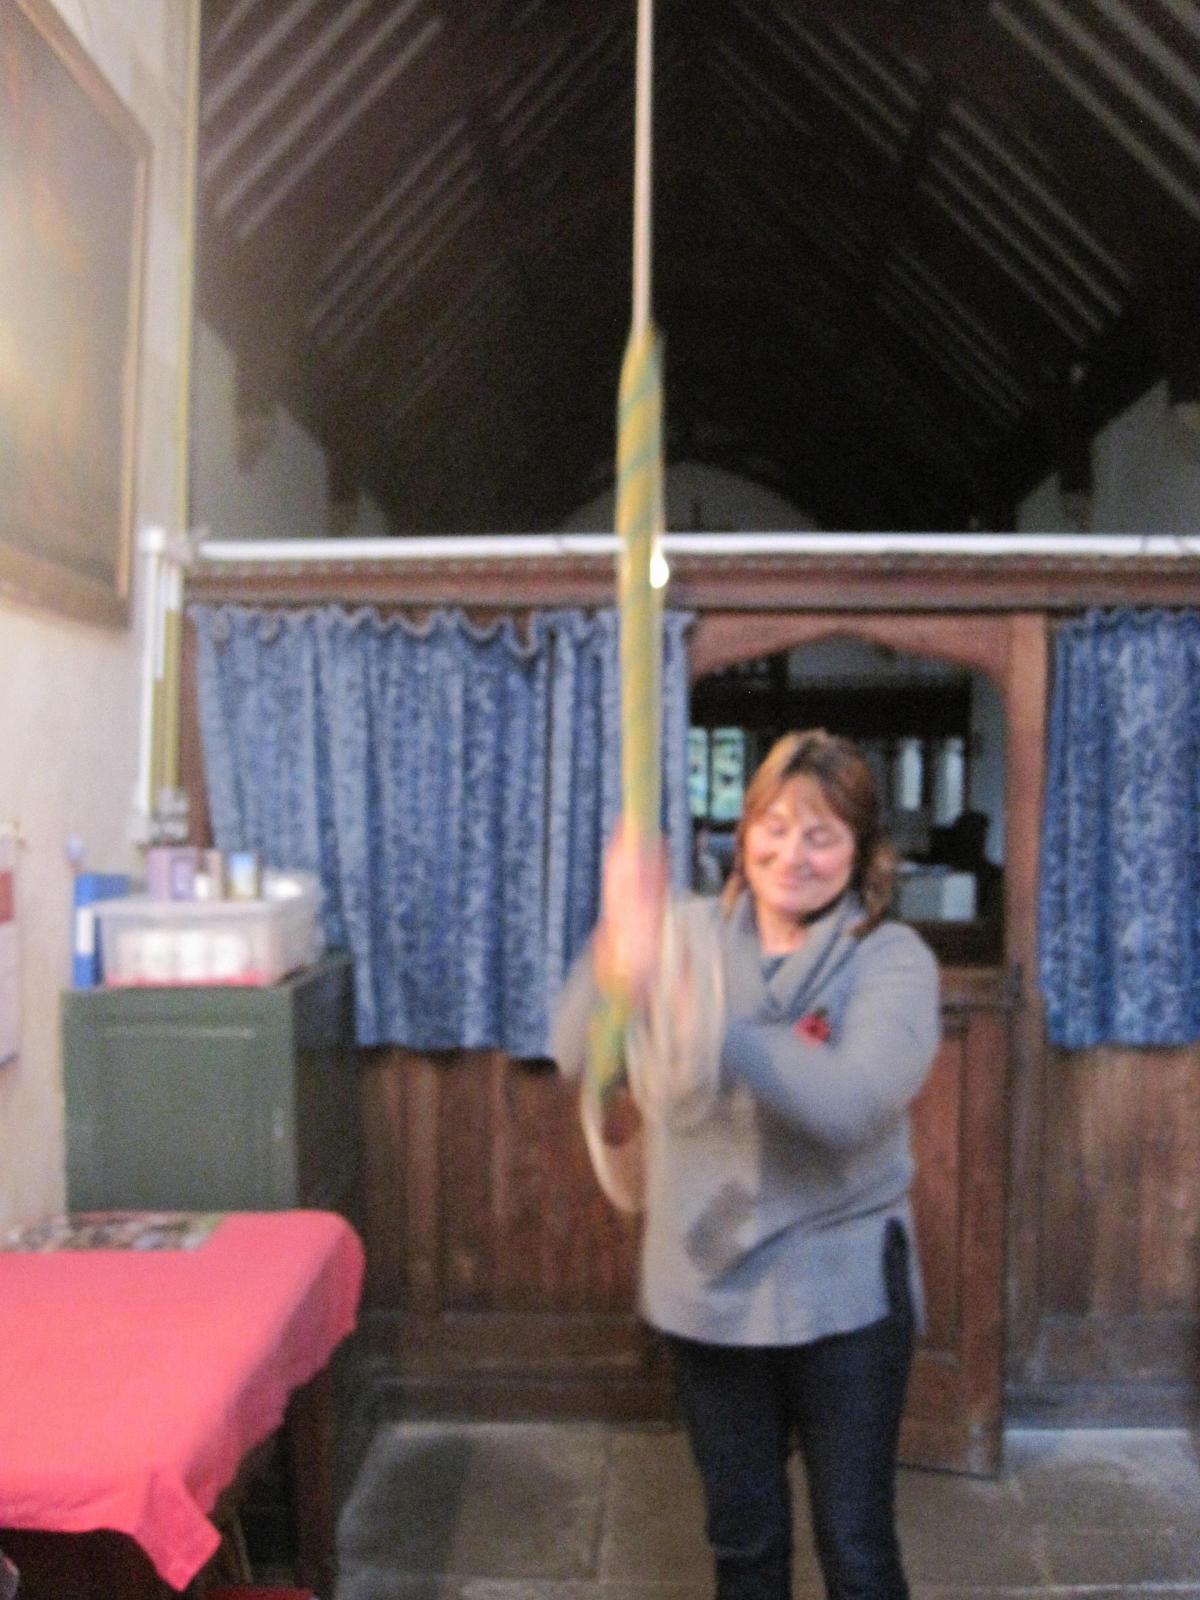 Ringing for peace at St, John's in Allerston